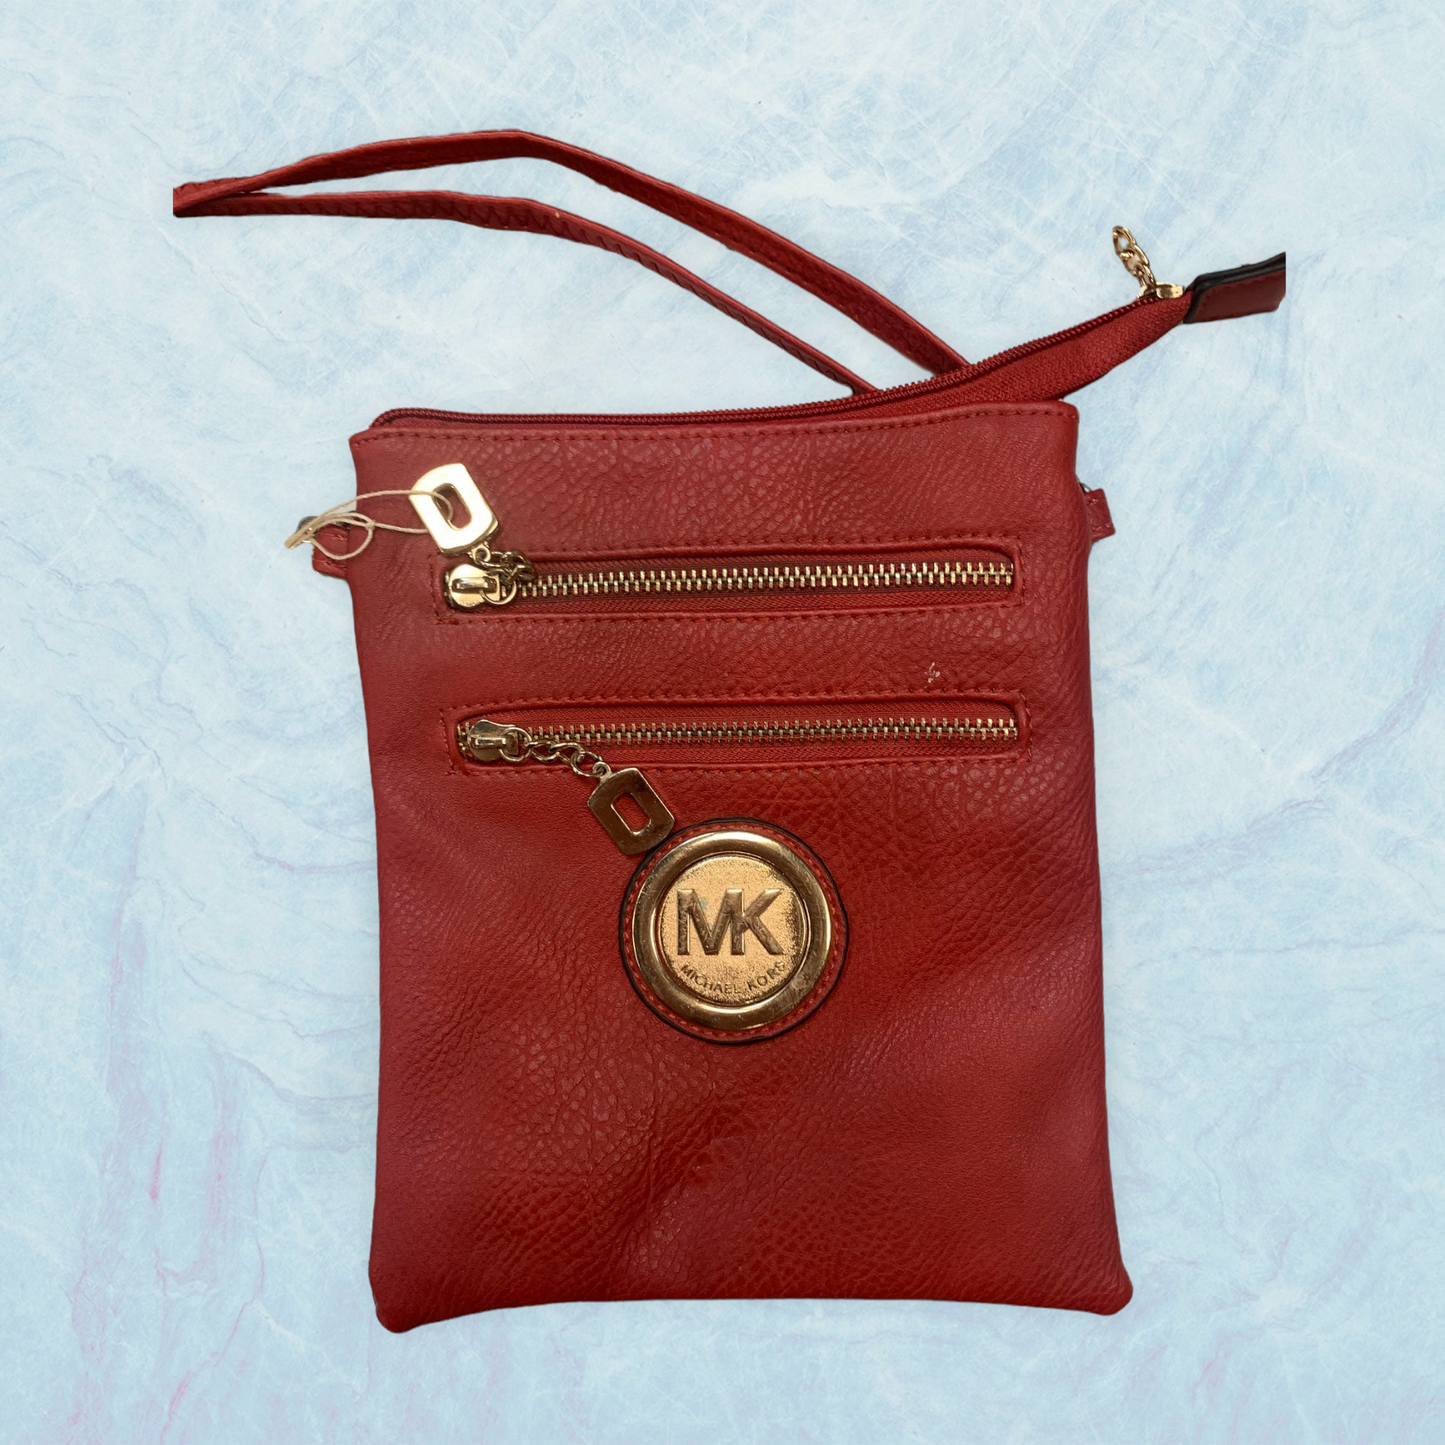 Micheal Kors - Red and Gold Purse - Crossbody Style